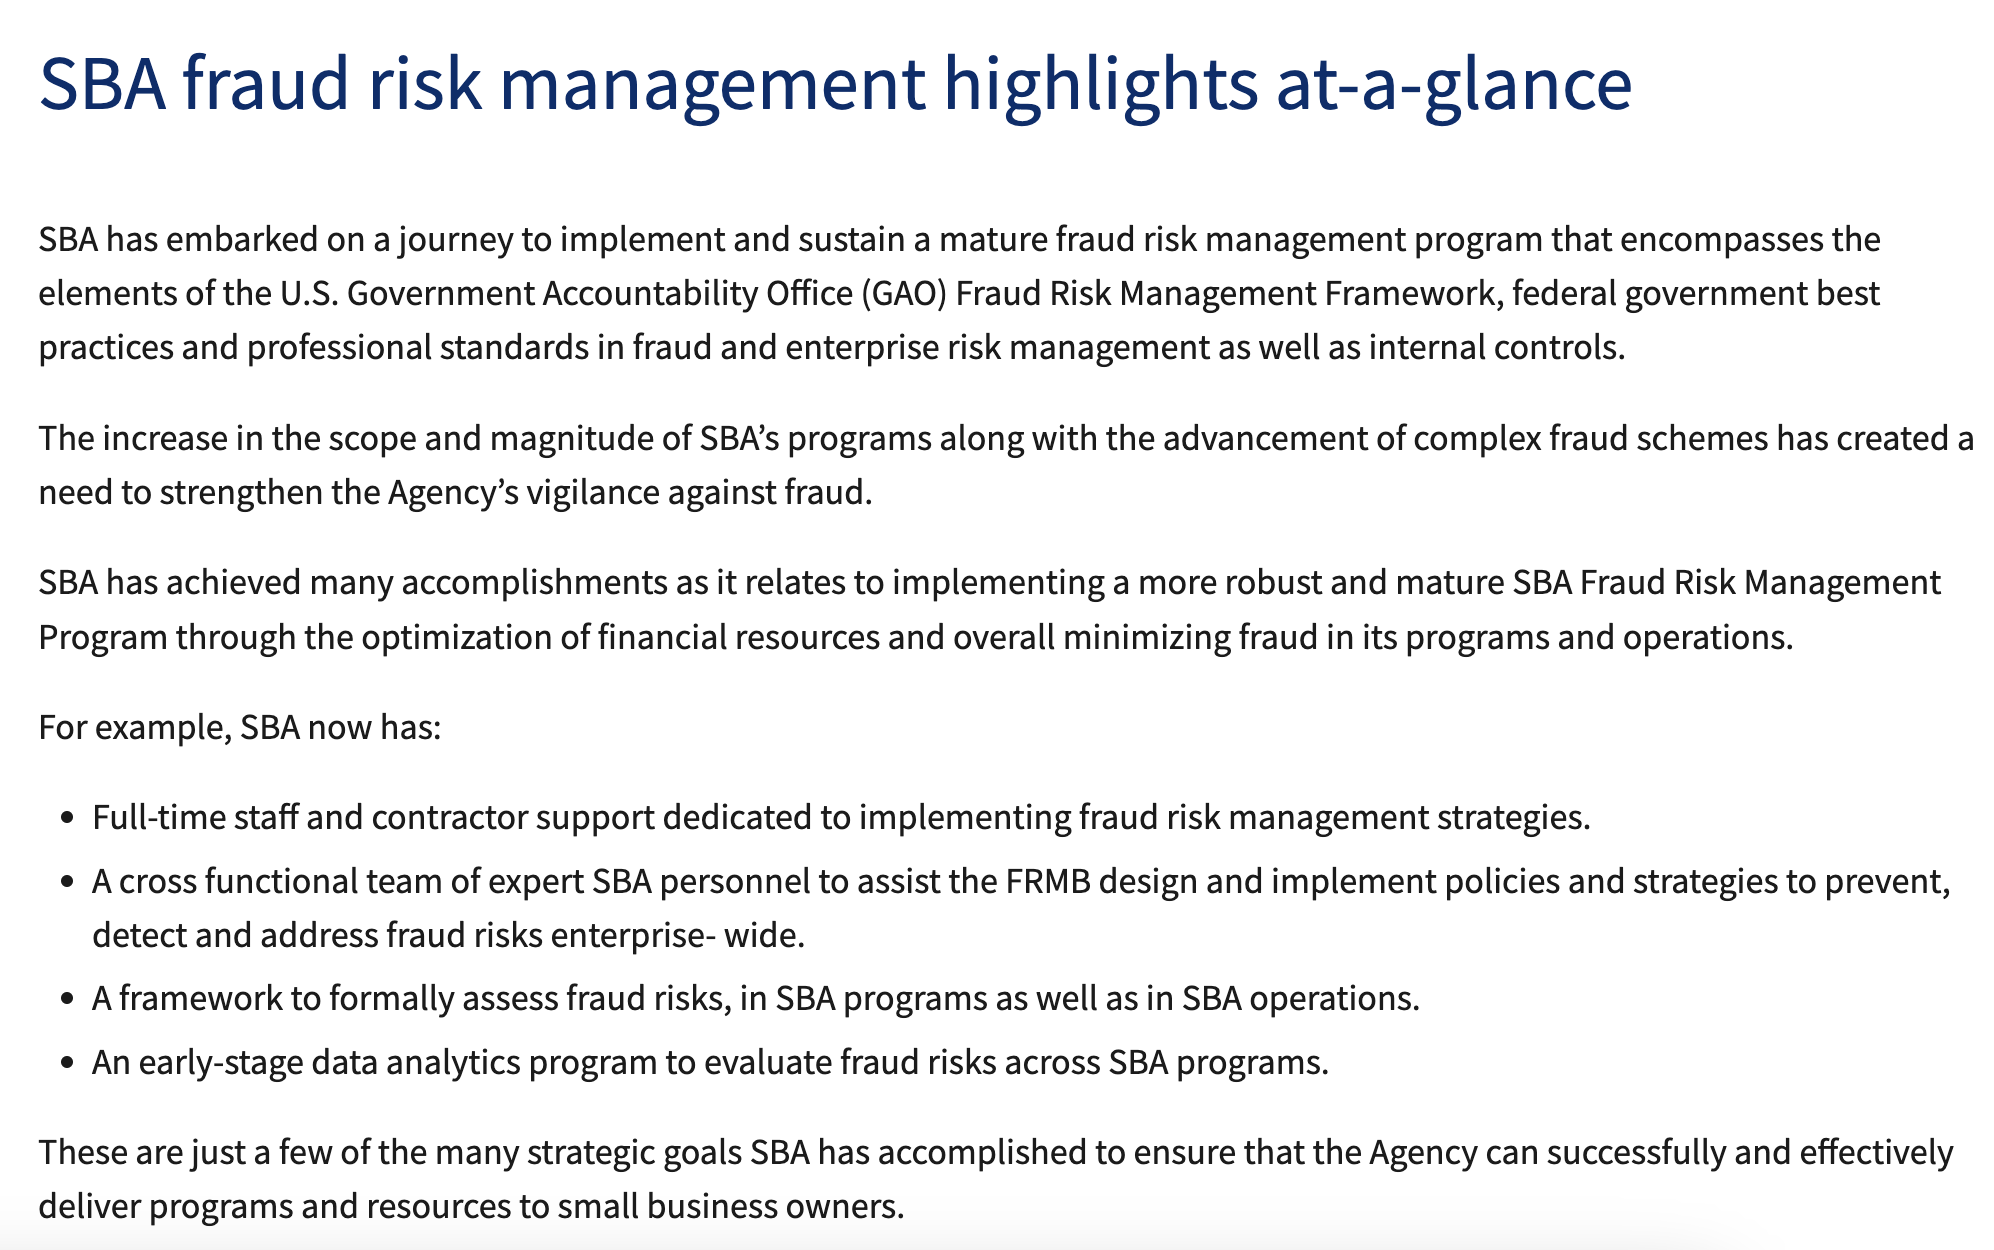 Can SBA loans be discharged in bankruptcy? SBA fraud management highlights at a glance.